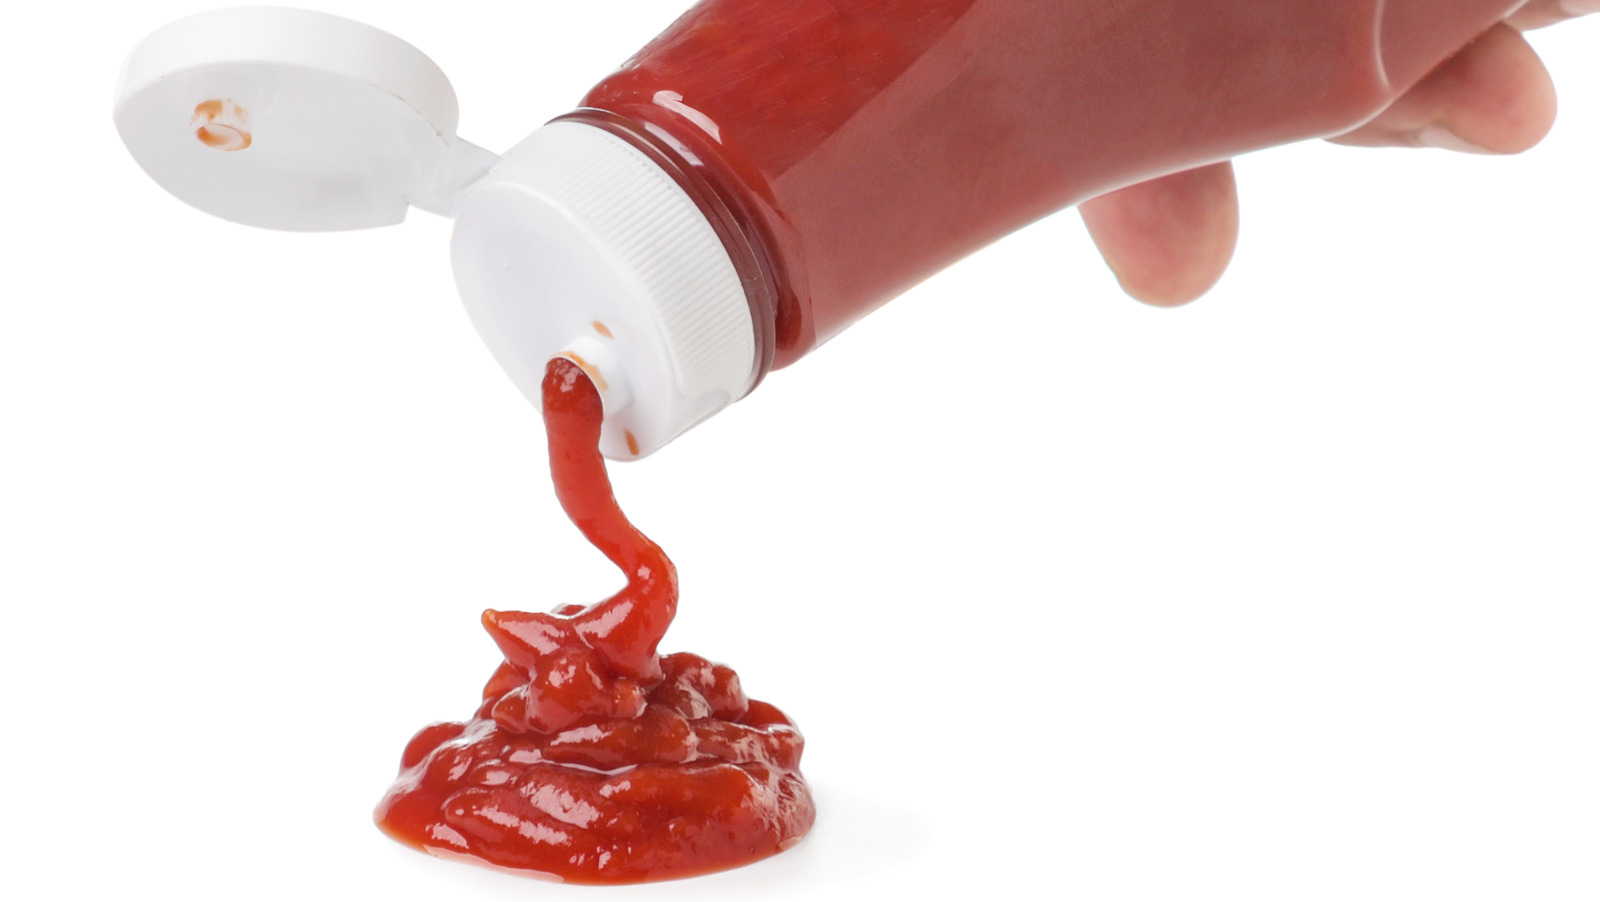 Ketchup with a Cause